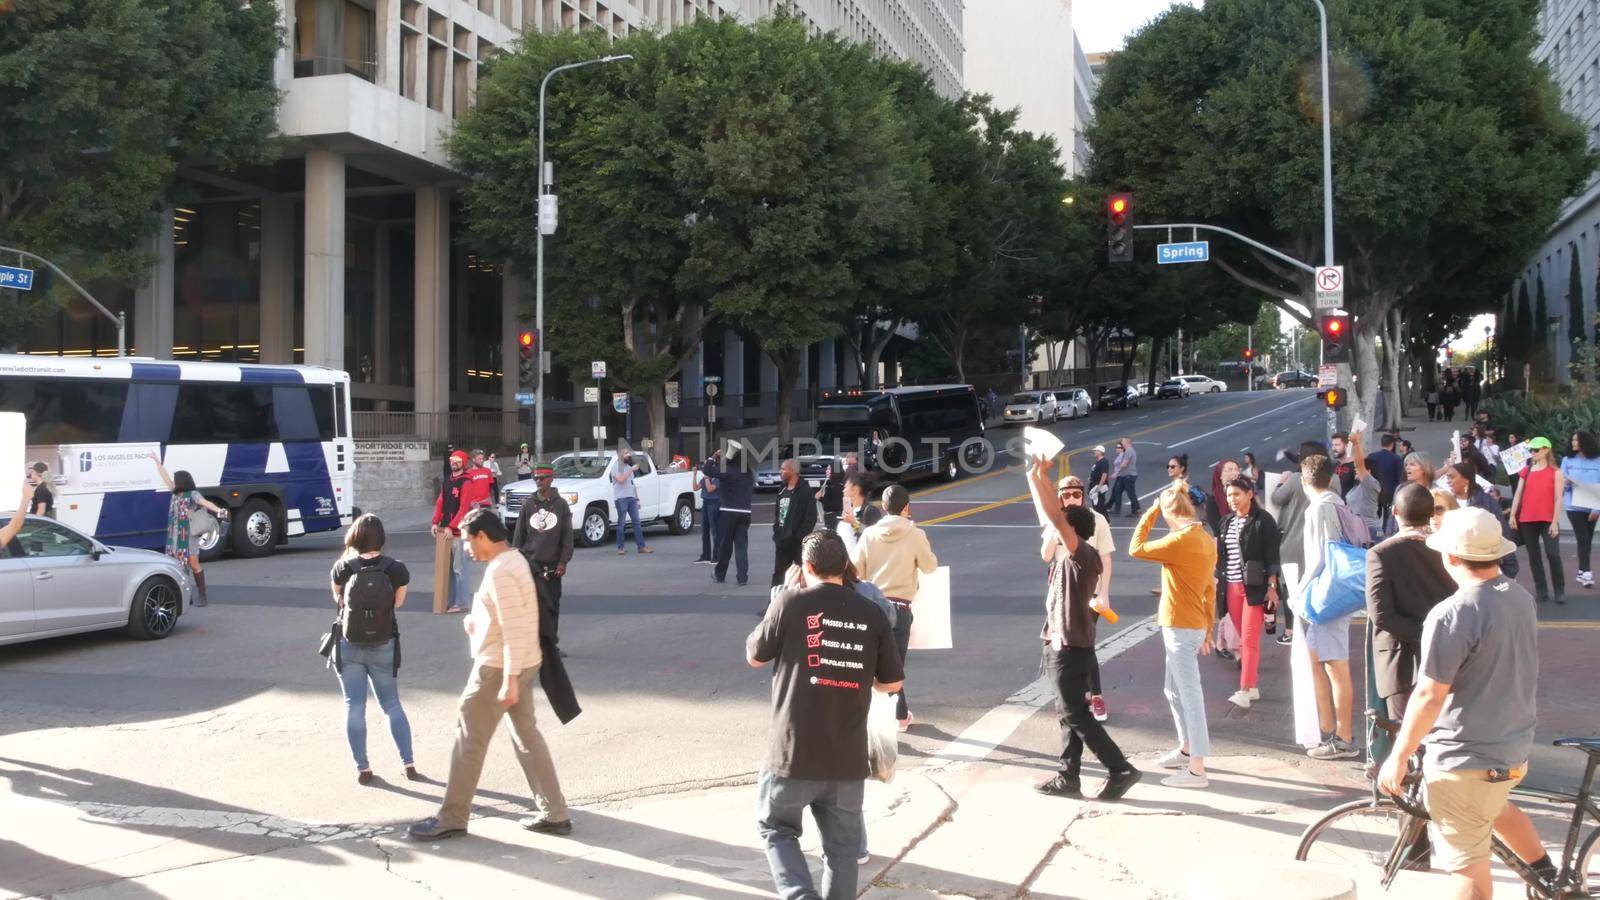 LOS ANGELES, CALIFORNIA, USA - 30 OCT 2019: People strike near Hall of Justice. Protest picket in front of Sheriff's Department and Courthouse. Demonstration of activists near LA government building by DogoraSun